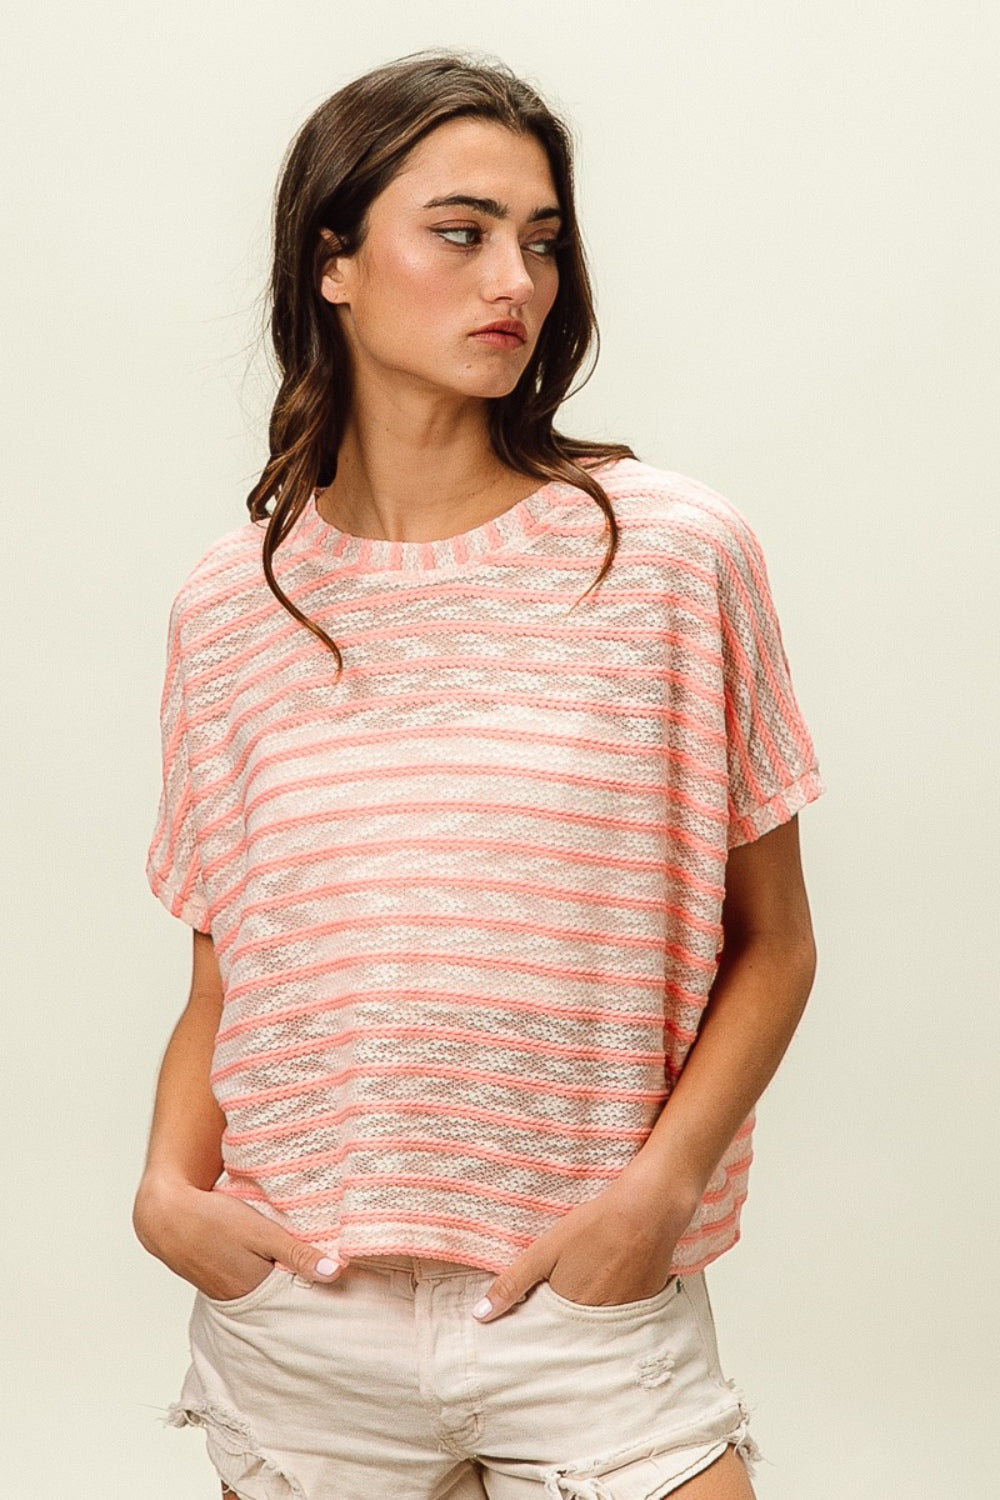 BiBi Relaxed Fit Braid Striped Short Sleeves Round Neck T-Shirt